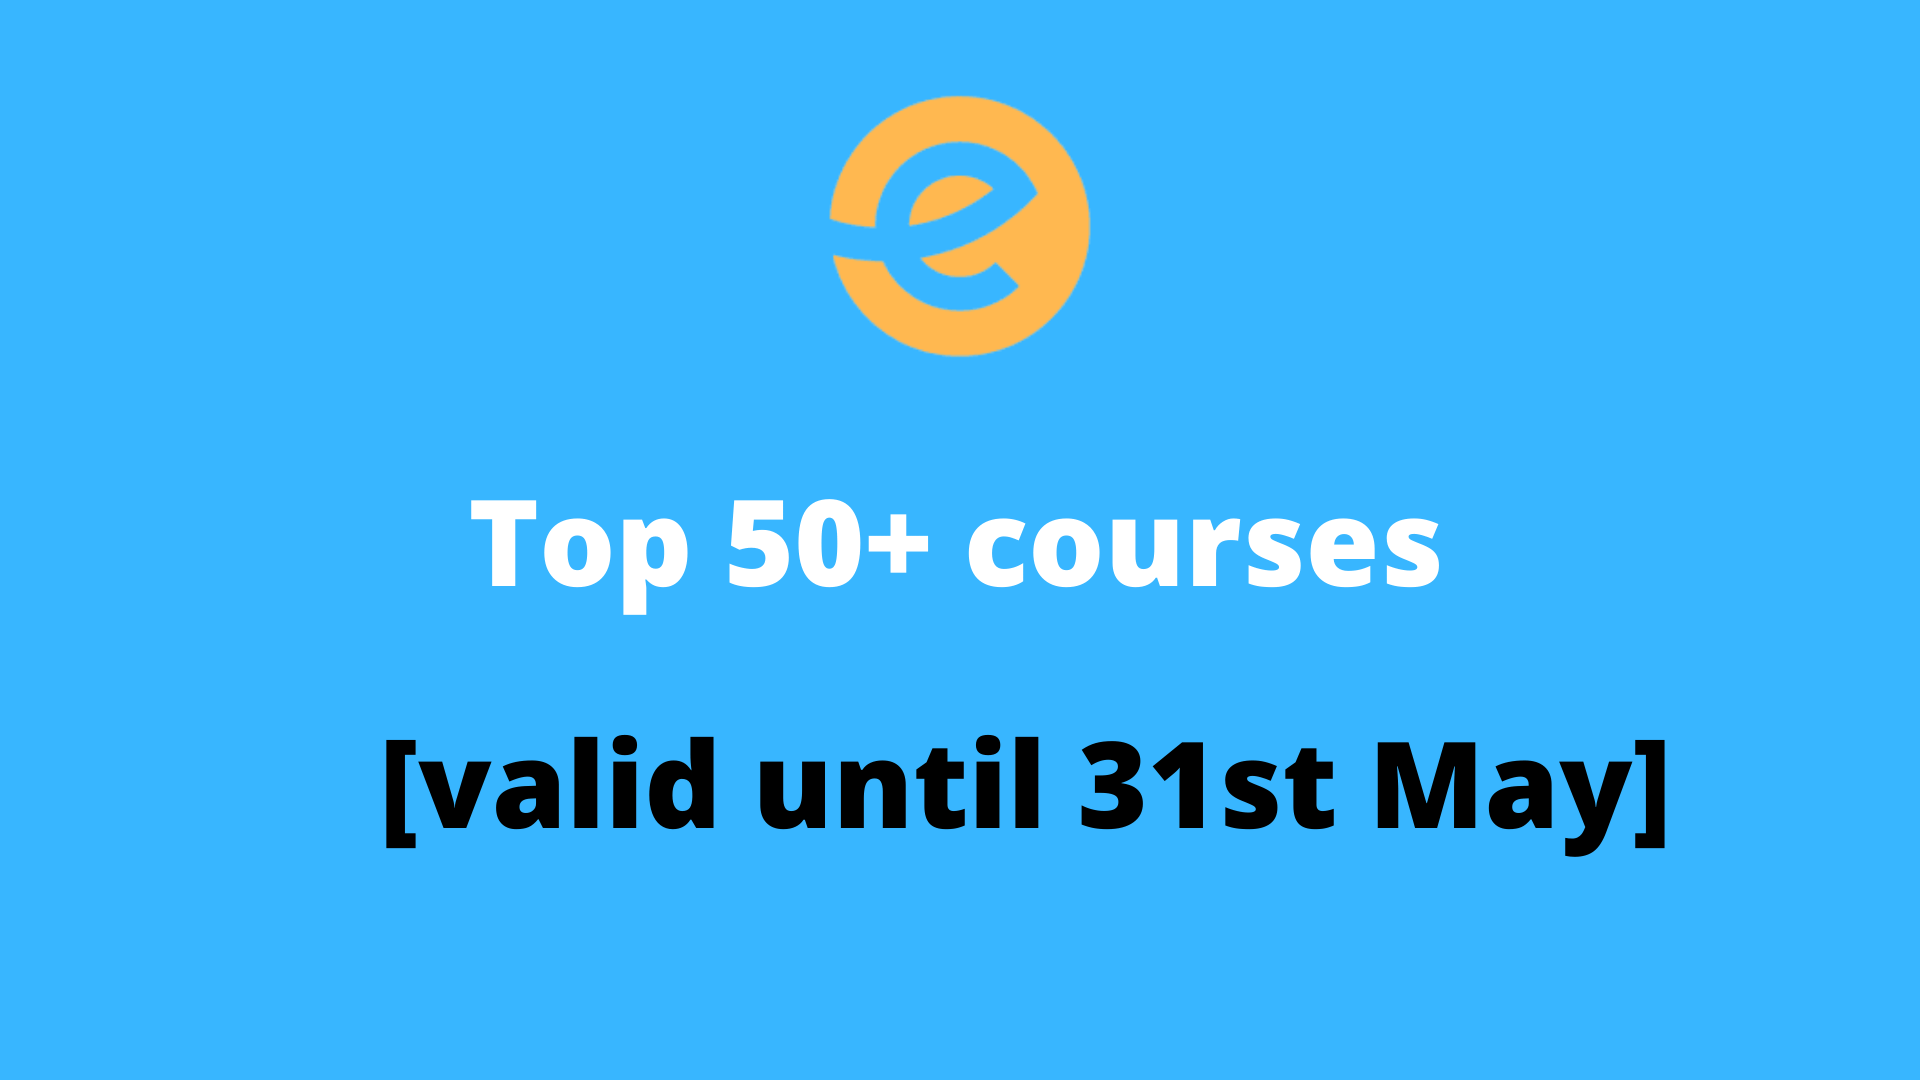 Top 50+ courses under ₹ 300